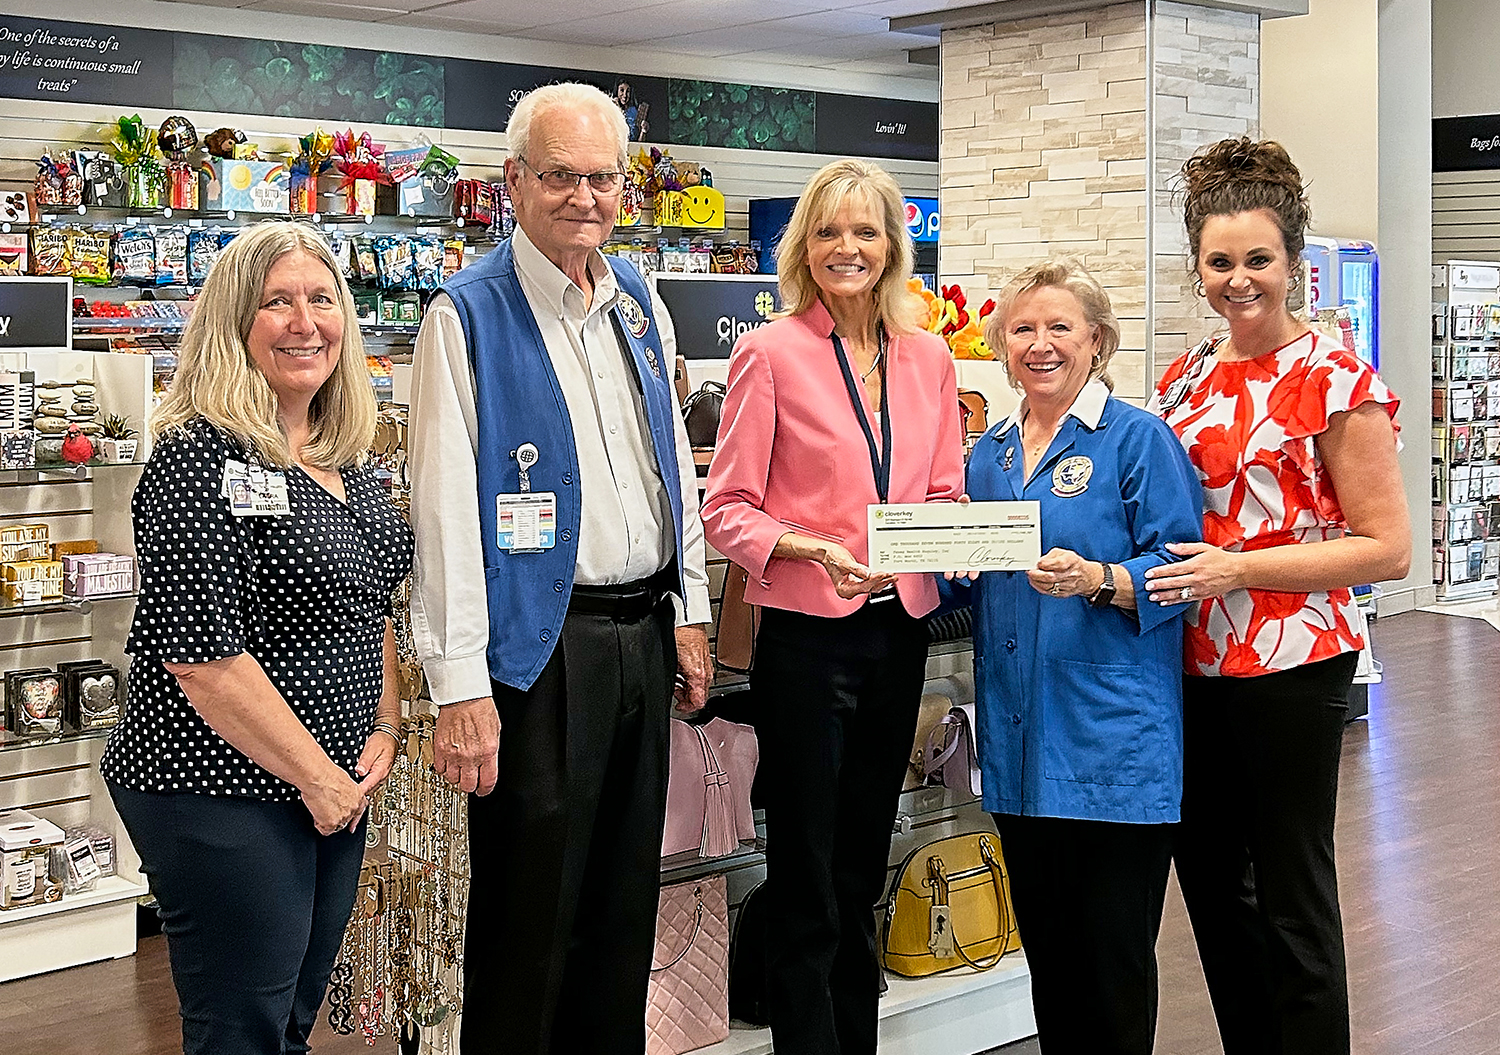 Kim Schuler, Chief Revenue Officer of Cloverkey, presents Texas Health Huguley volunteers a commission check.